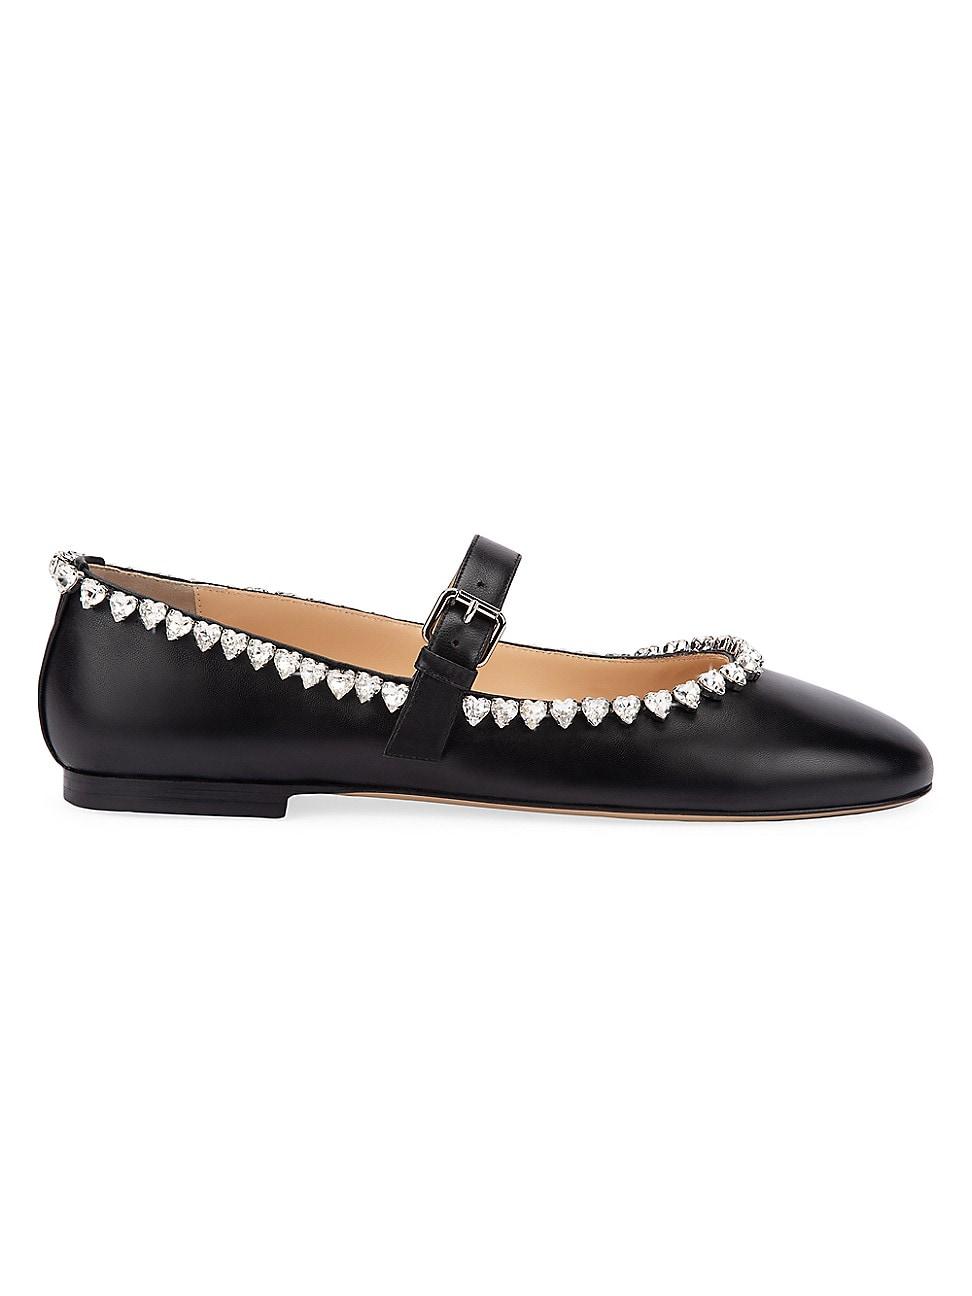 Mach & Mach Audrey Embellished Leather Mary Jane Ballet Flats in Black ...